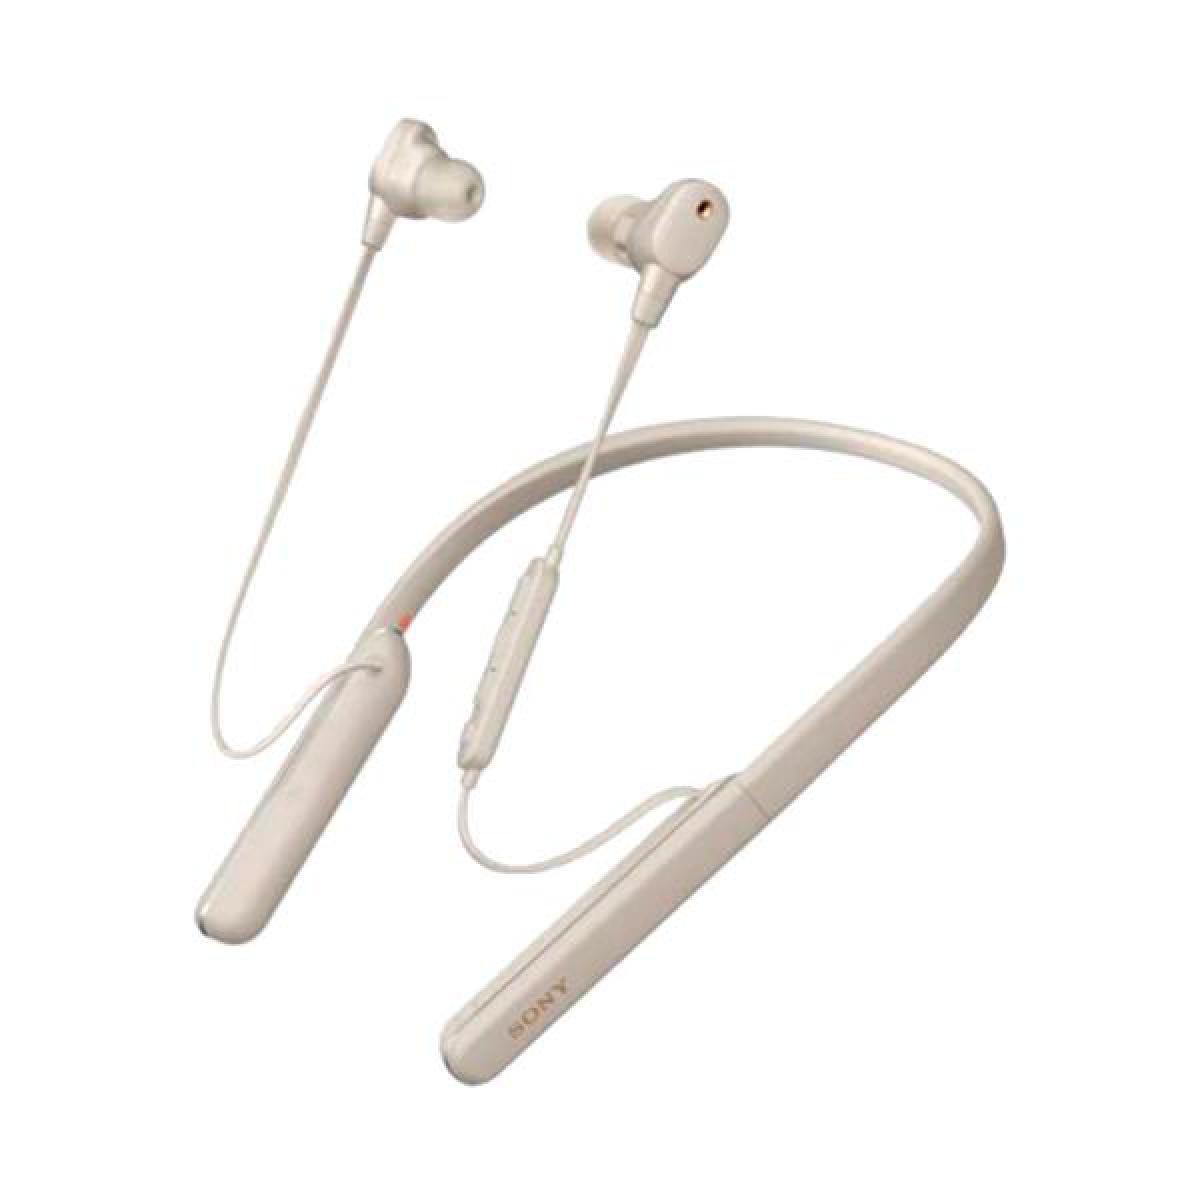 Sony - Sony Wi-1000xm2 Plata Auriculares Inalámbricos In-ear Noise Cancelling Bluetooth - Bracelet connecté